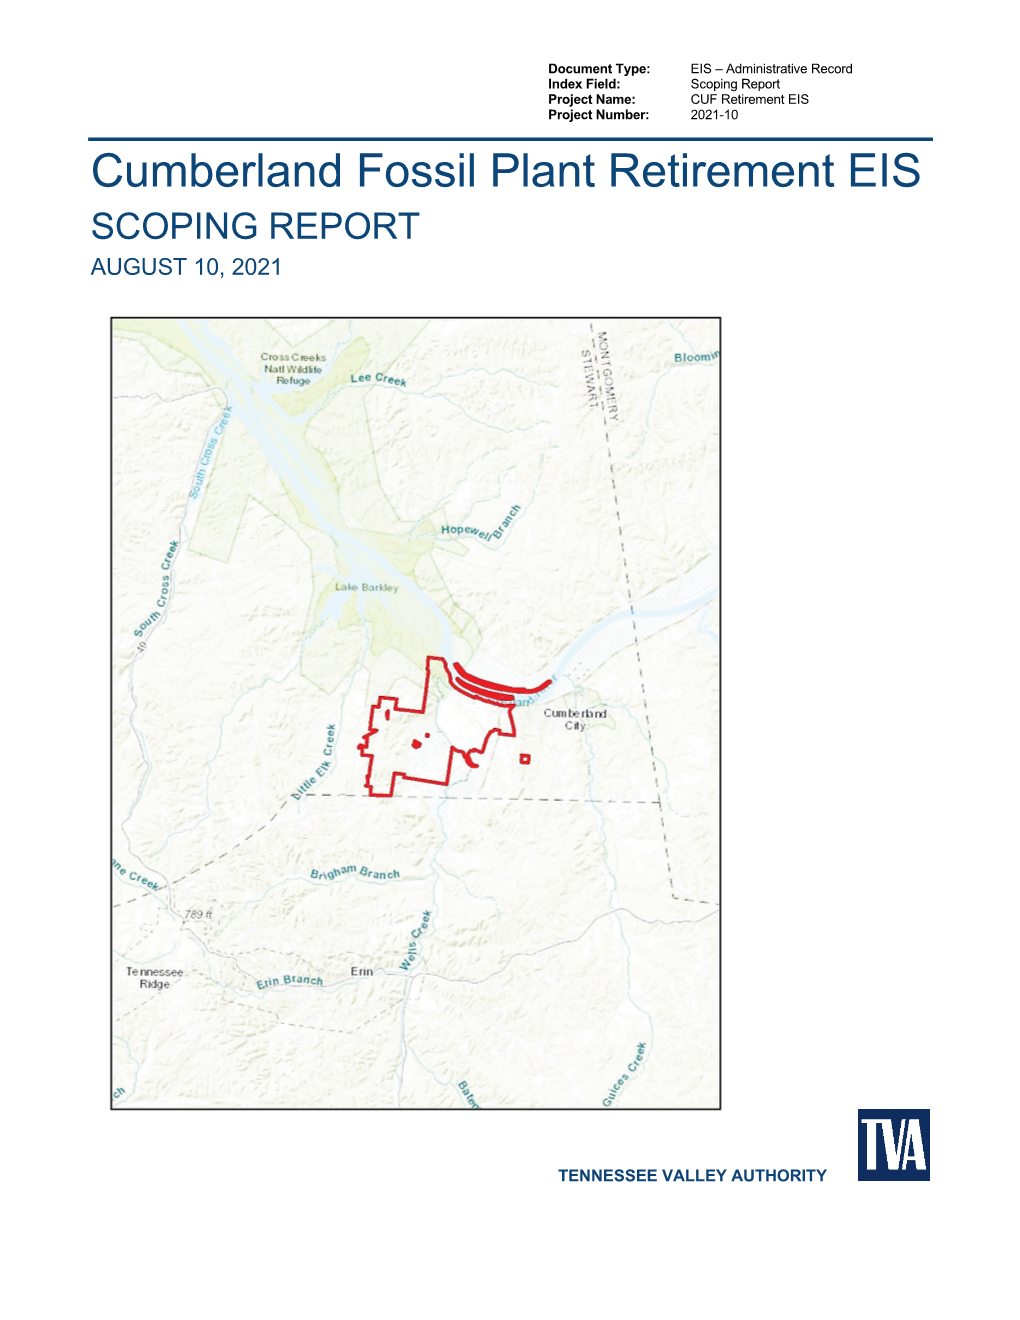 Cumberland Fossil Plant Retirement EIS SCOPING REPORT AUGUST 10, 2021